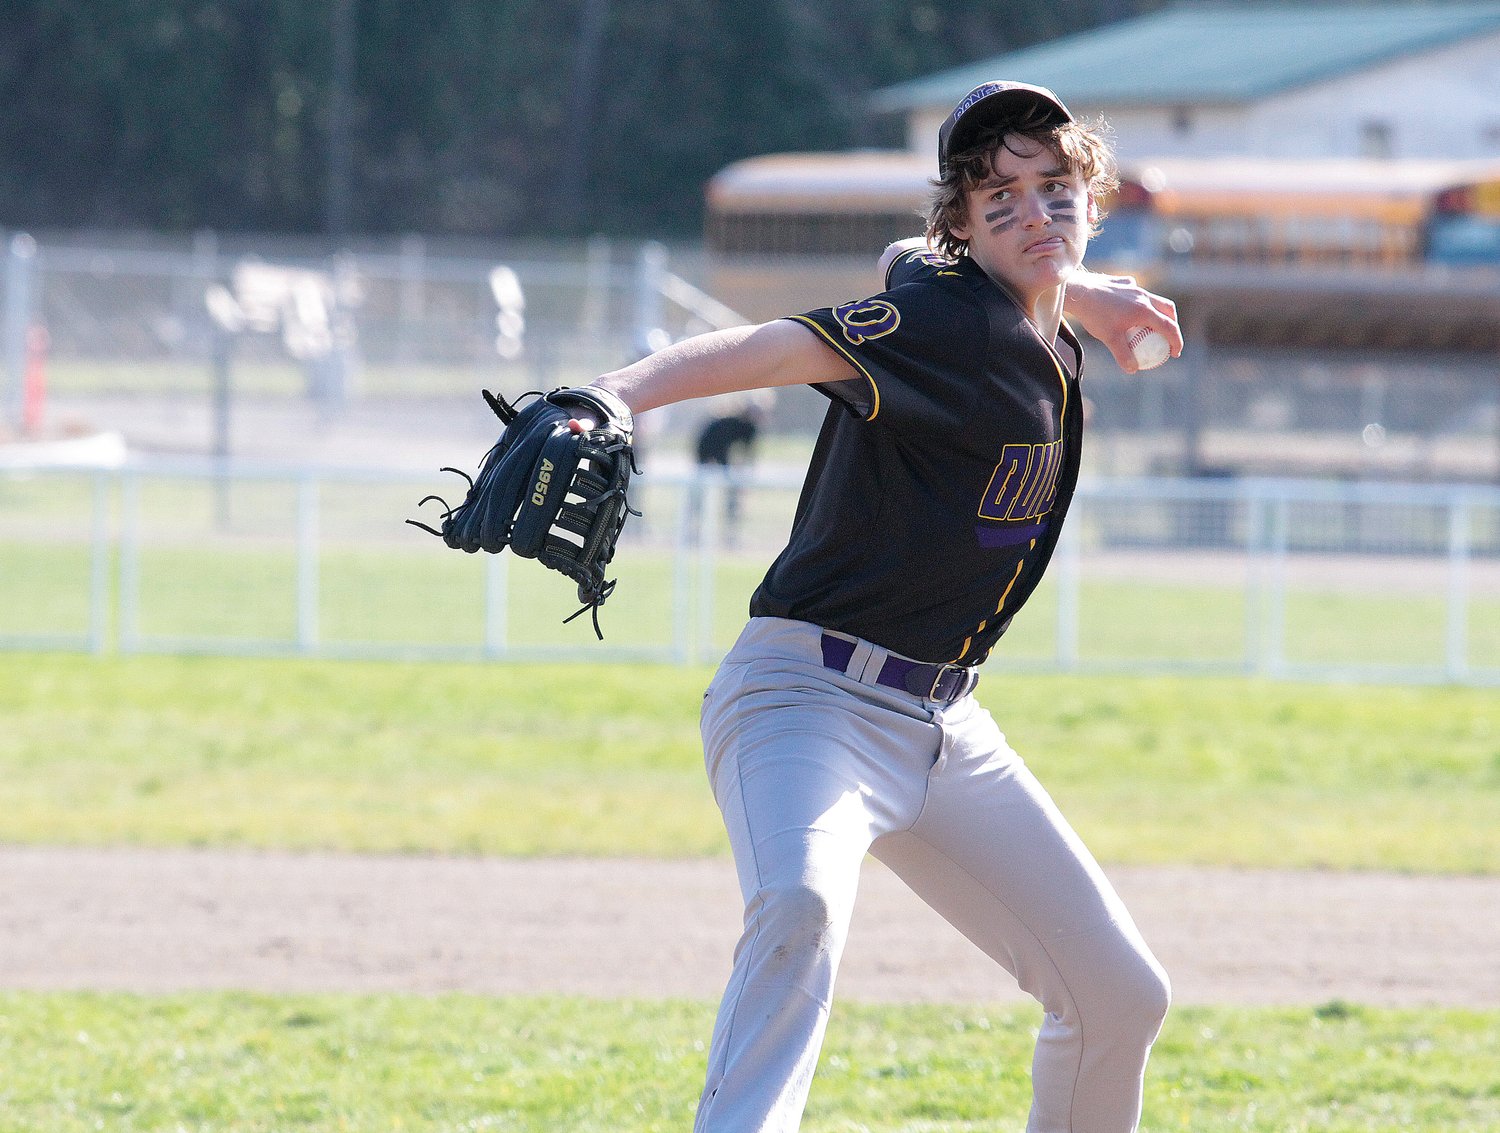 Ranger pitcher Oliver Hopkins winds up during action against Concordia Christian.